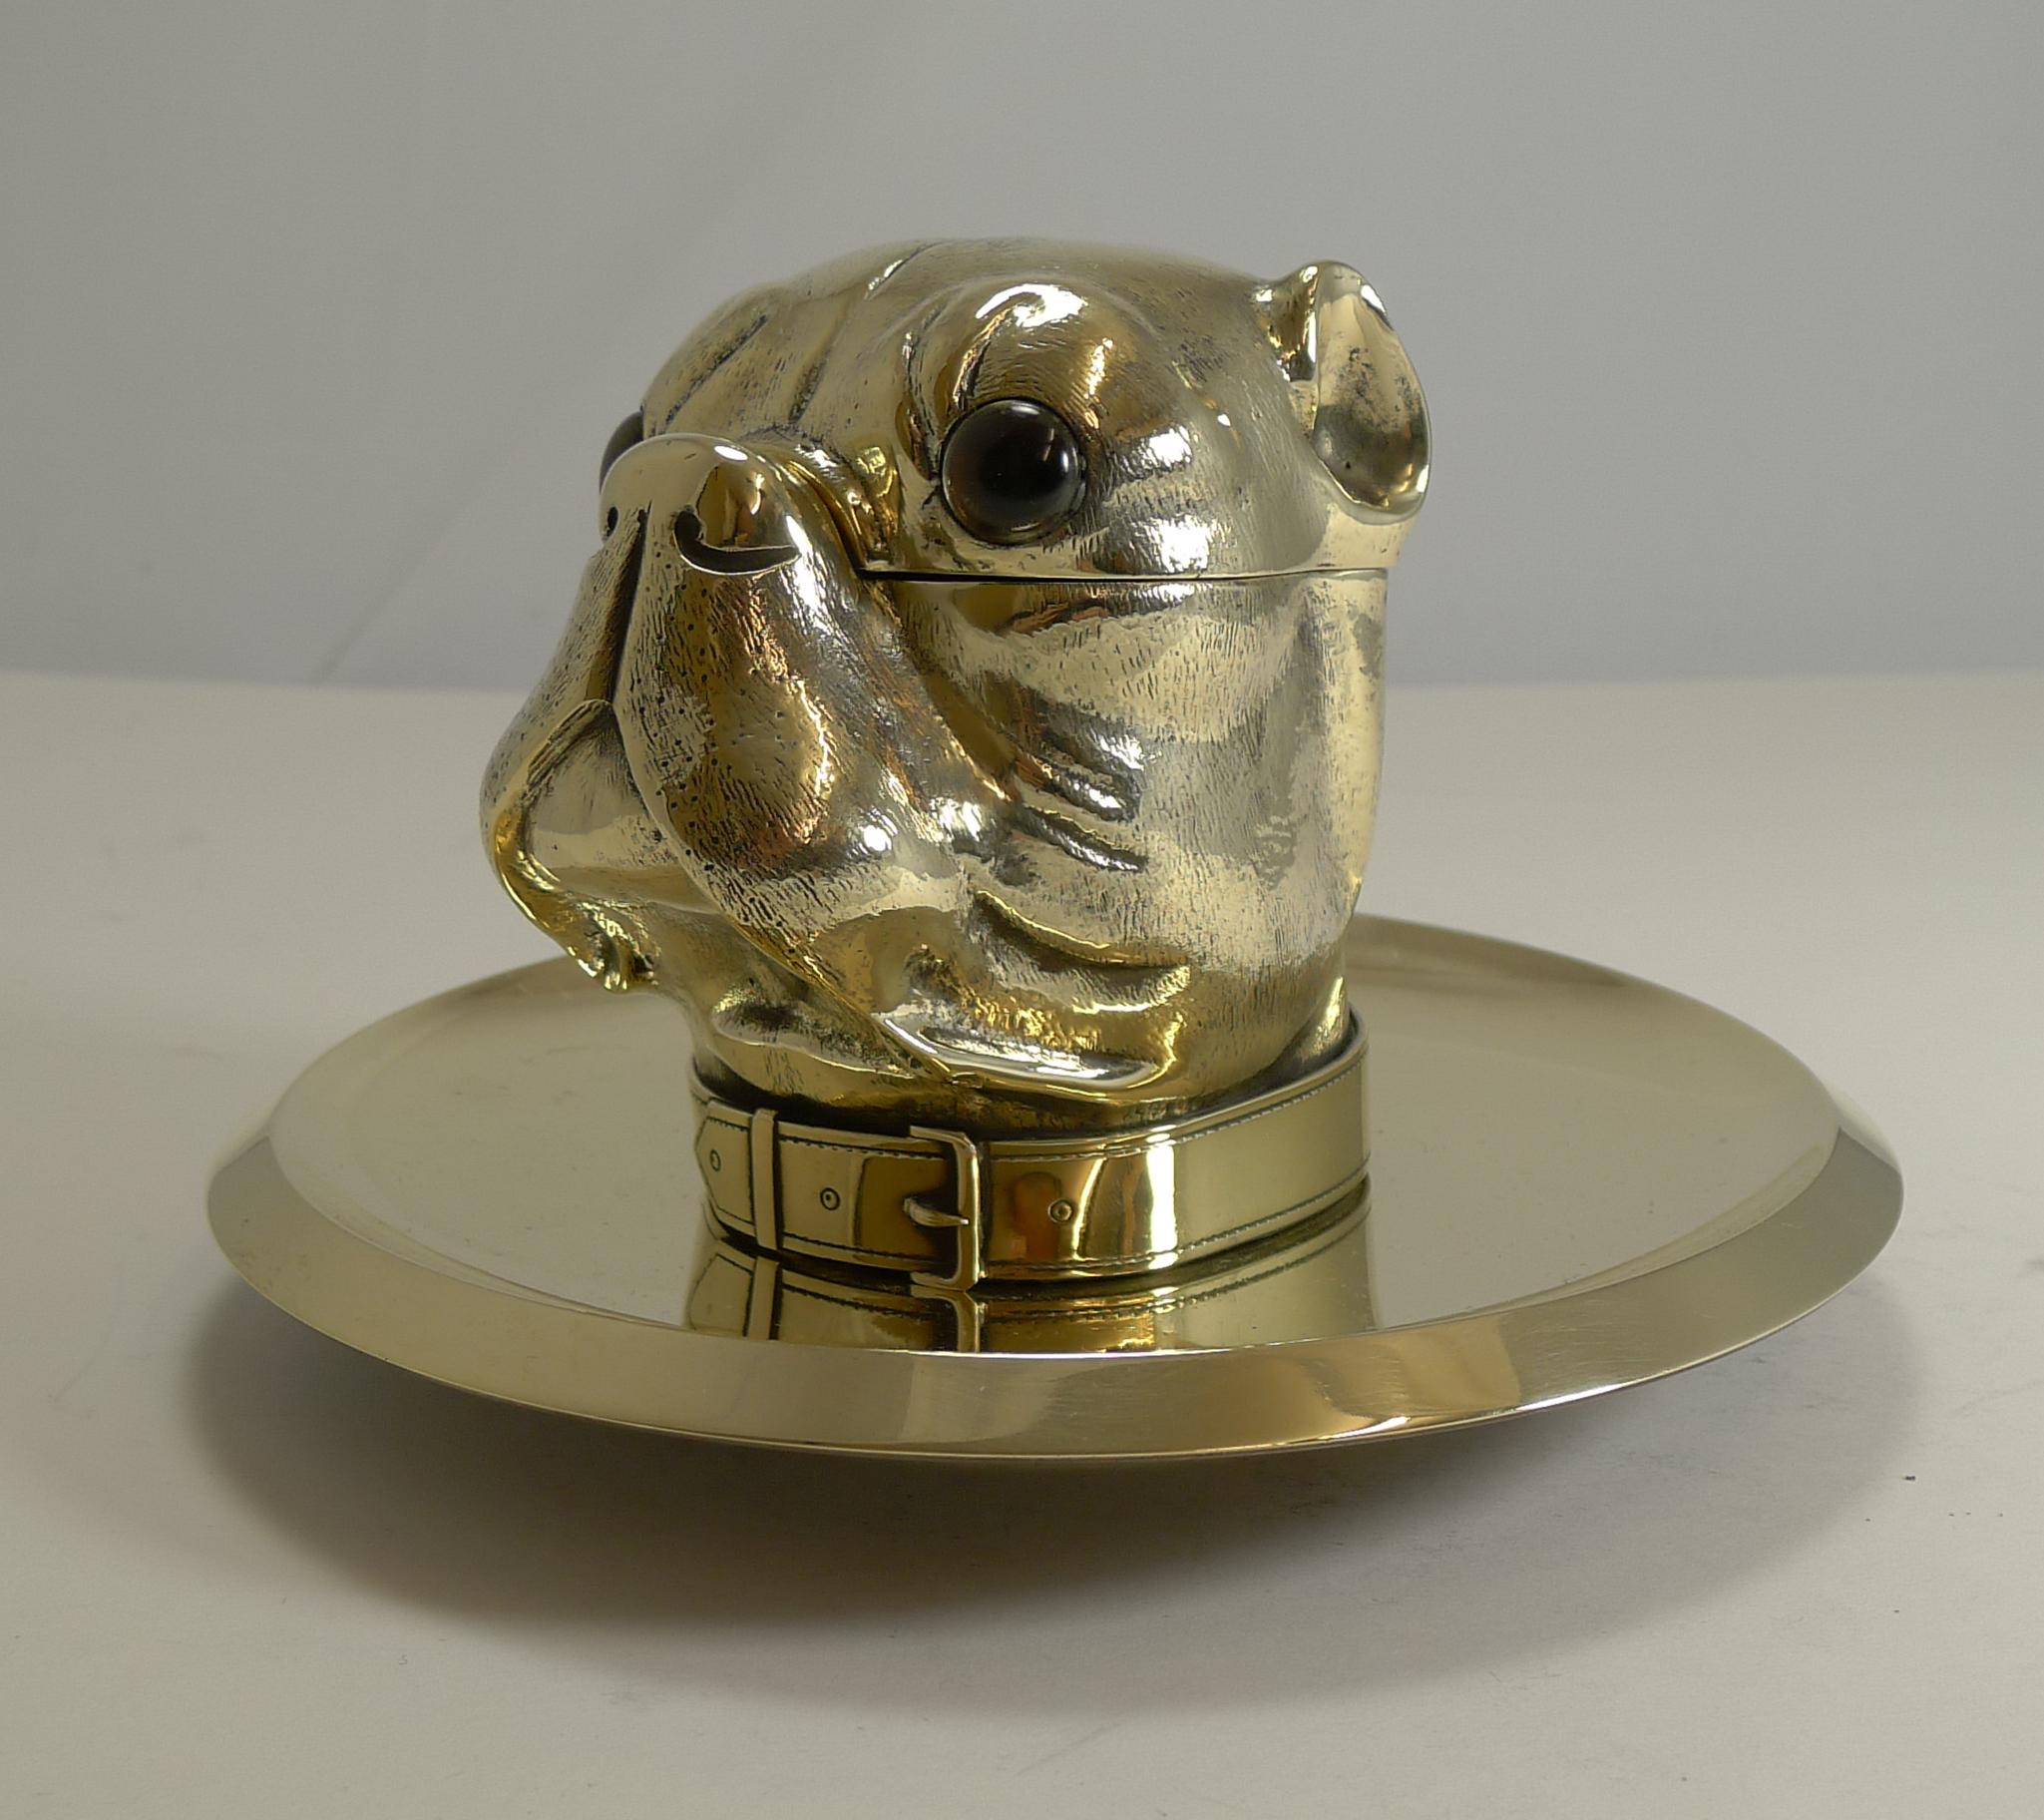 Grand English Bulldog Novelty Inkwell with Glass Eyes, circa 1880 For Sale 1